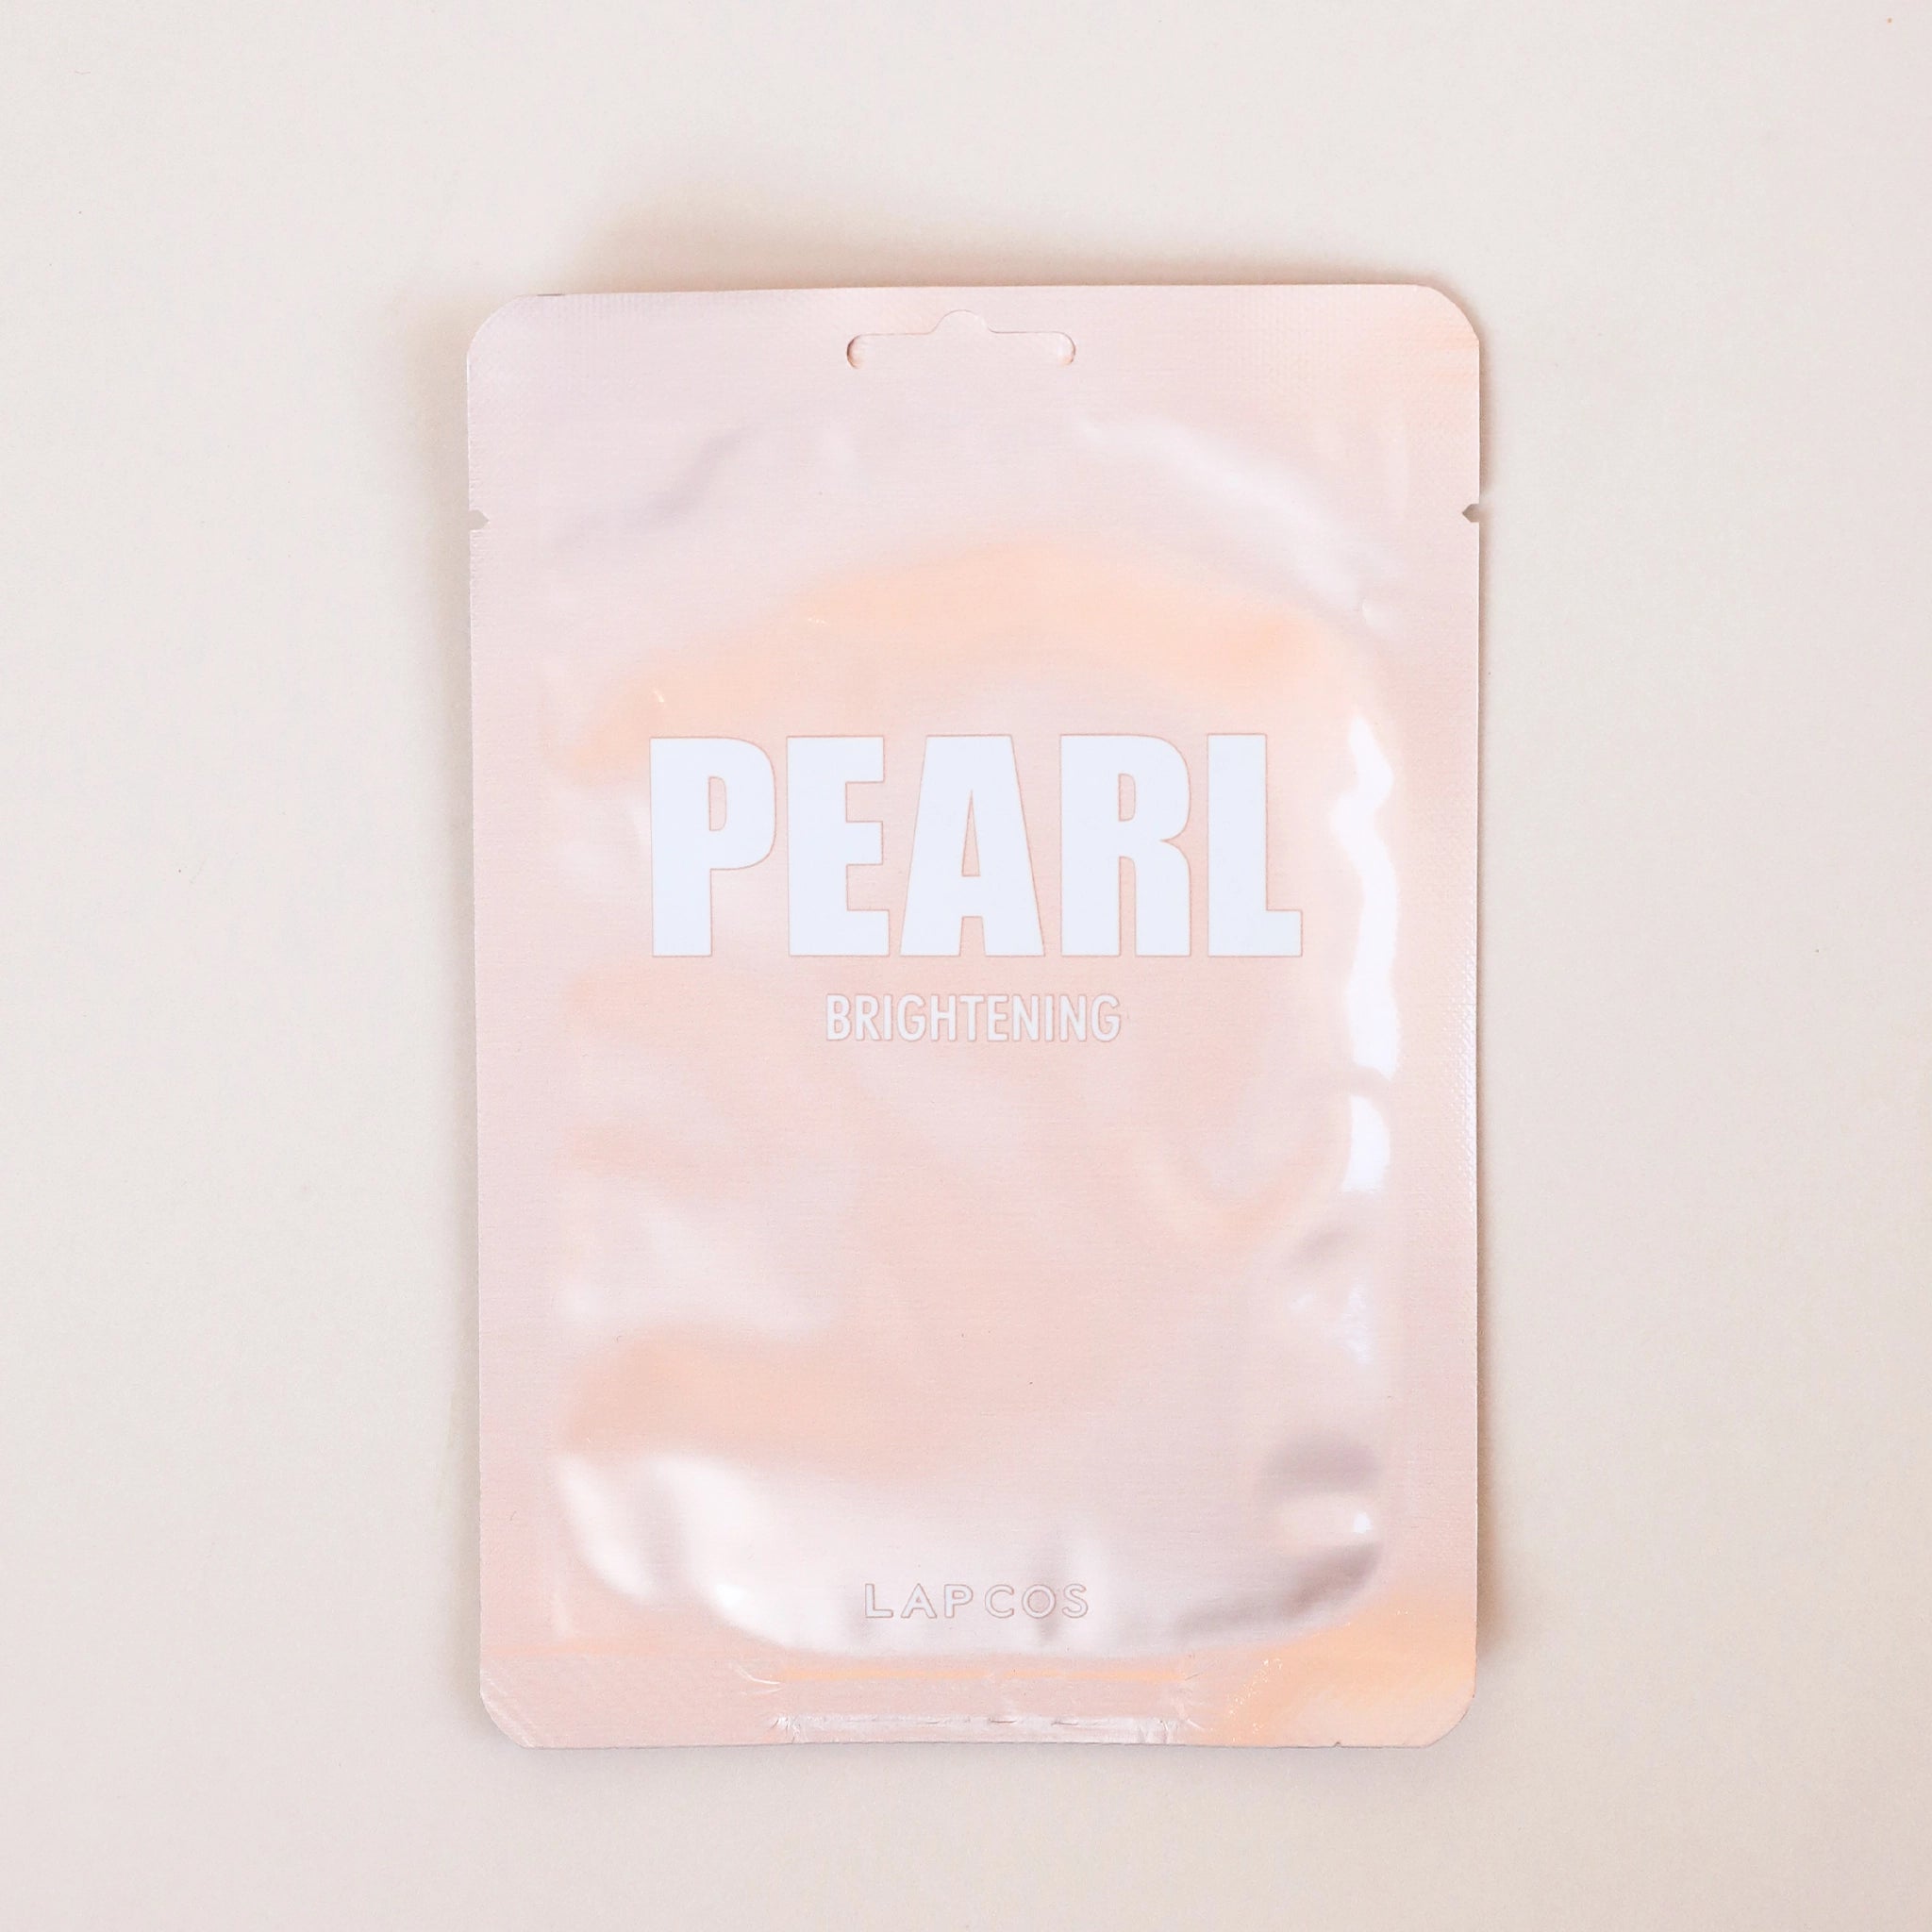 A rose gold pouch containing a face mask reads pearl brightening.